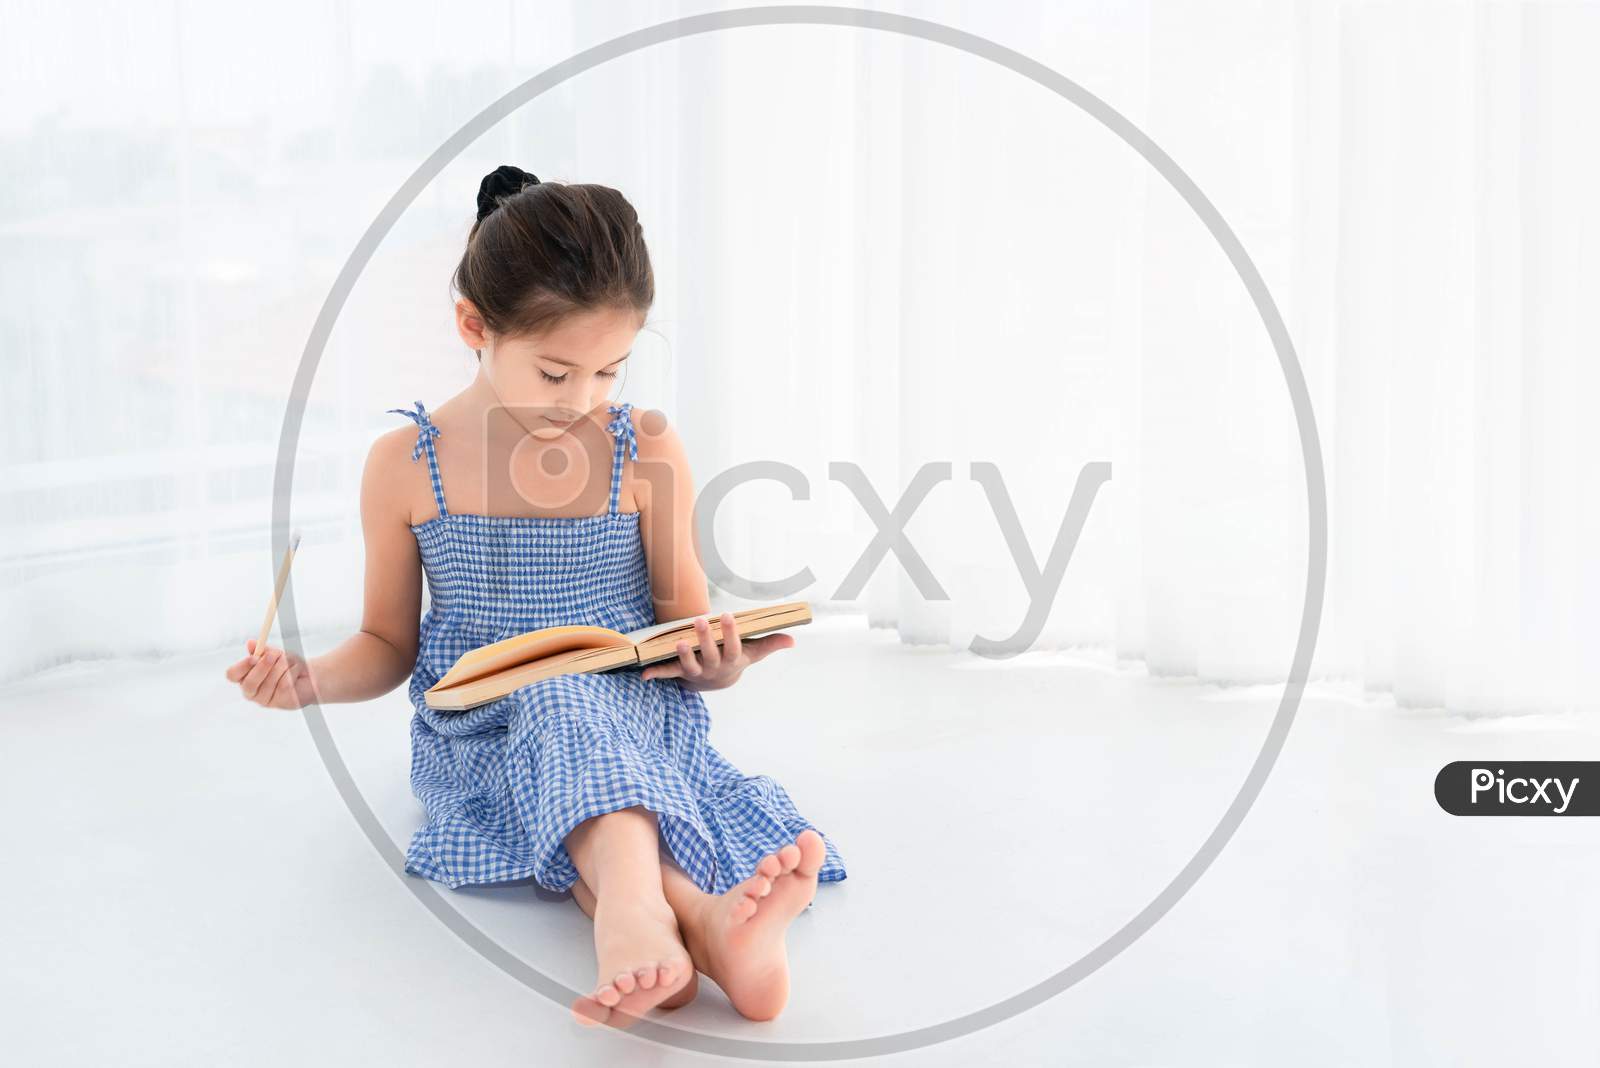 Cute Girl Reviewing Homework And Lessons With Notebook And Wooden Pencil In Hand In White Bedroom Background At Home. Education And People Lifestyles. Self-Learning Concept. Back To School Theme.